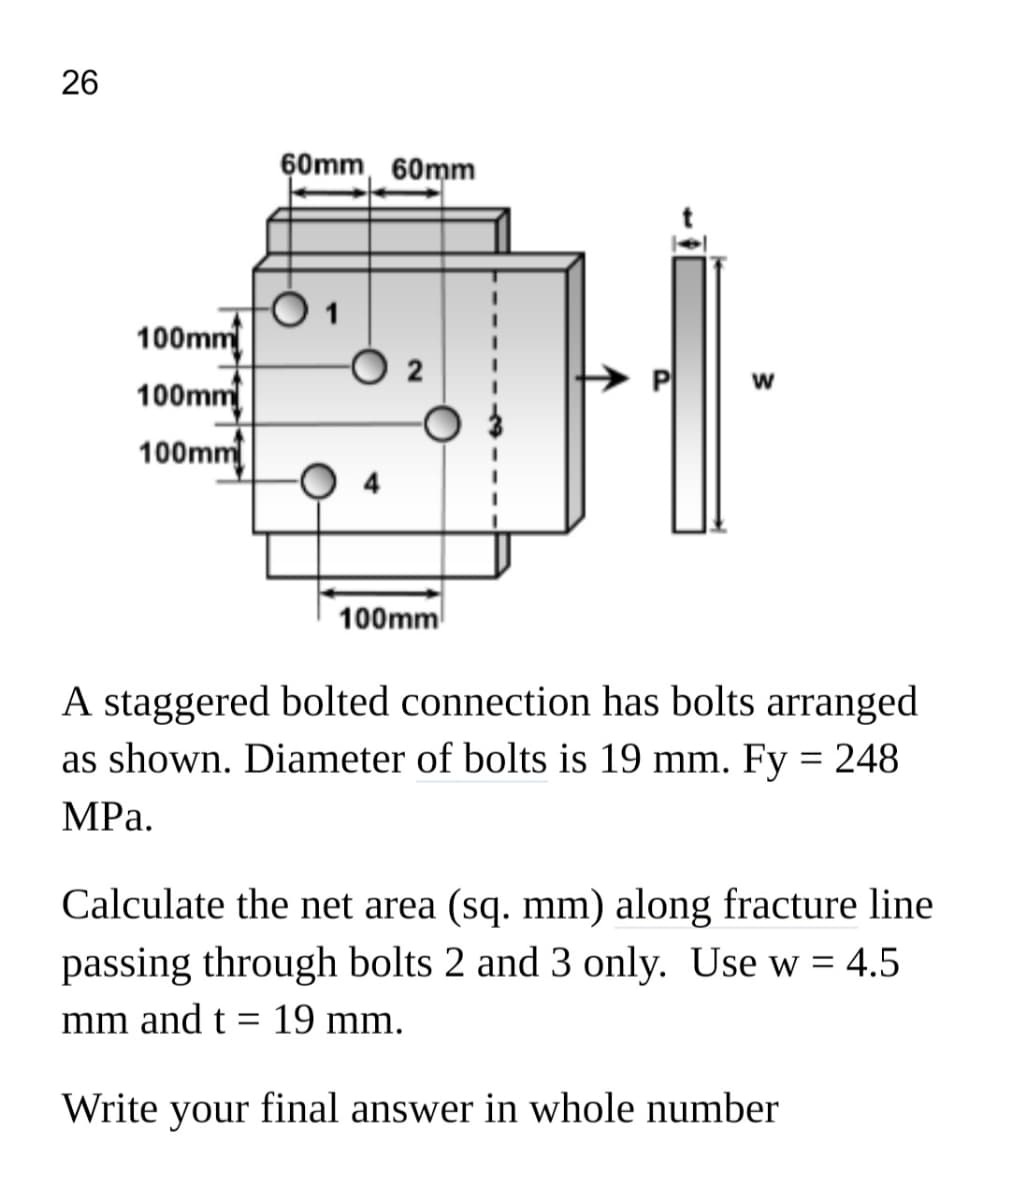 26
60mm, 60mm
100mm
100mm
100mm
100mm
A staggered bolted connection has bolts arranged
as shown. Diameter of bolts is 19 mm. Fy = 248
MРа.
Calculate the net area (sq. mm) along fracture line
passing through bolts 2 and 3 only. Use w = 4.5
mm and t =
19 mm.
Write
your
final answer in whole number
